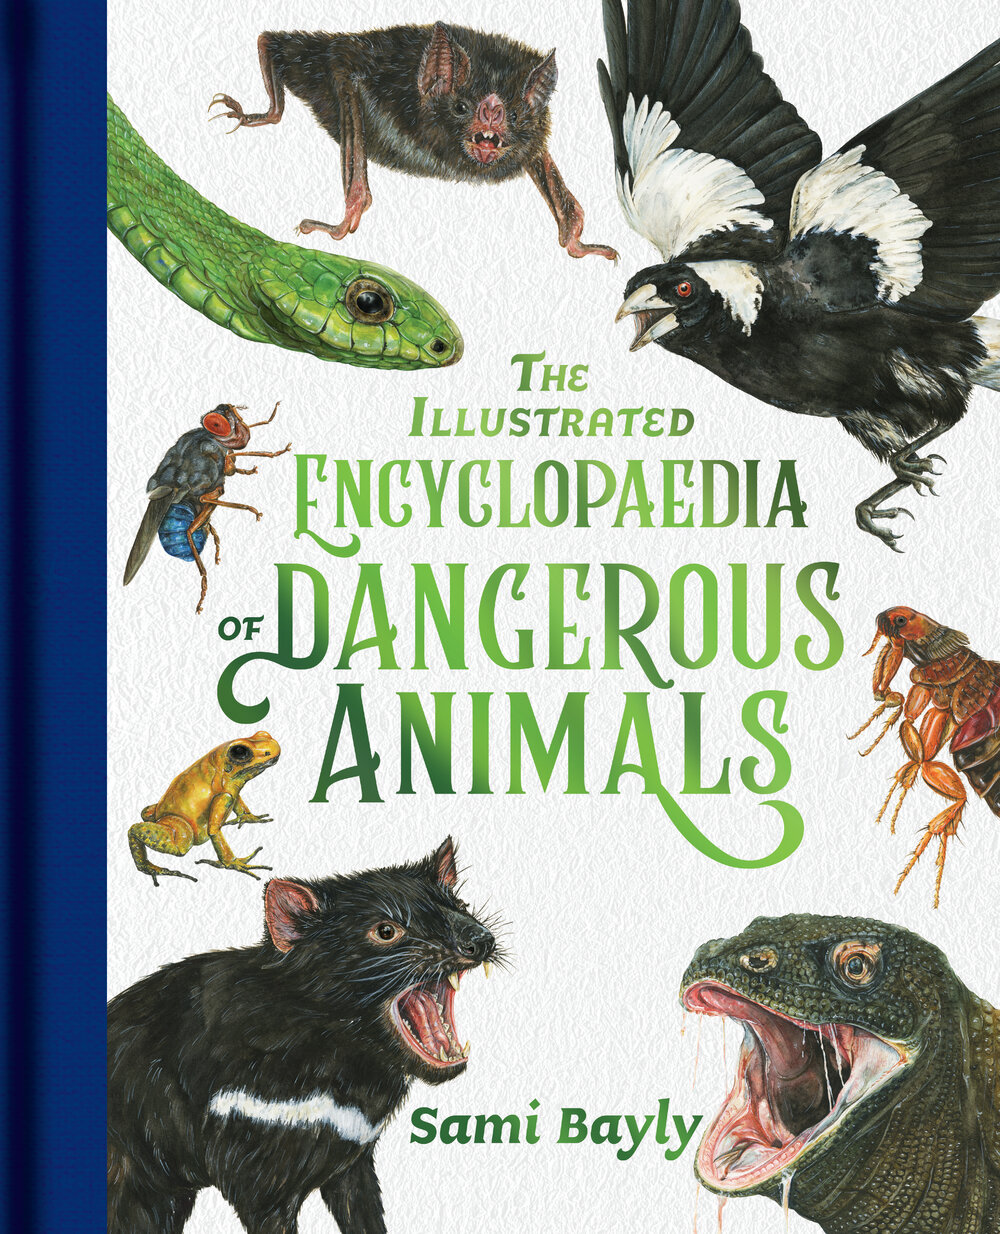 The Illustrated Encyclopedia of Dangerous Animals